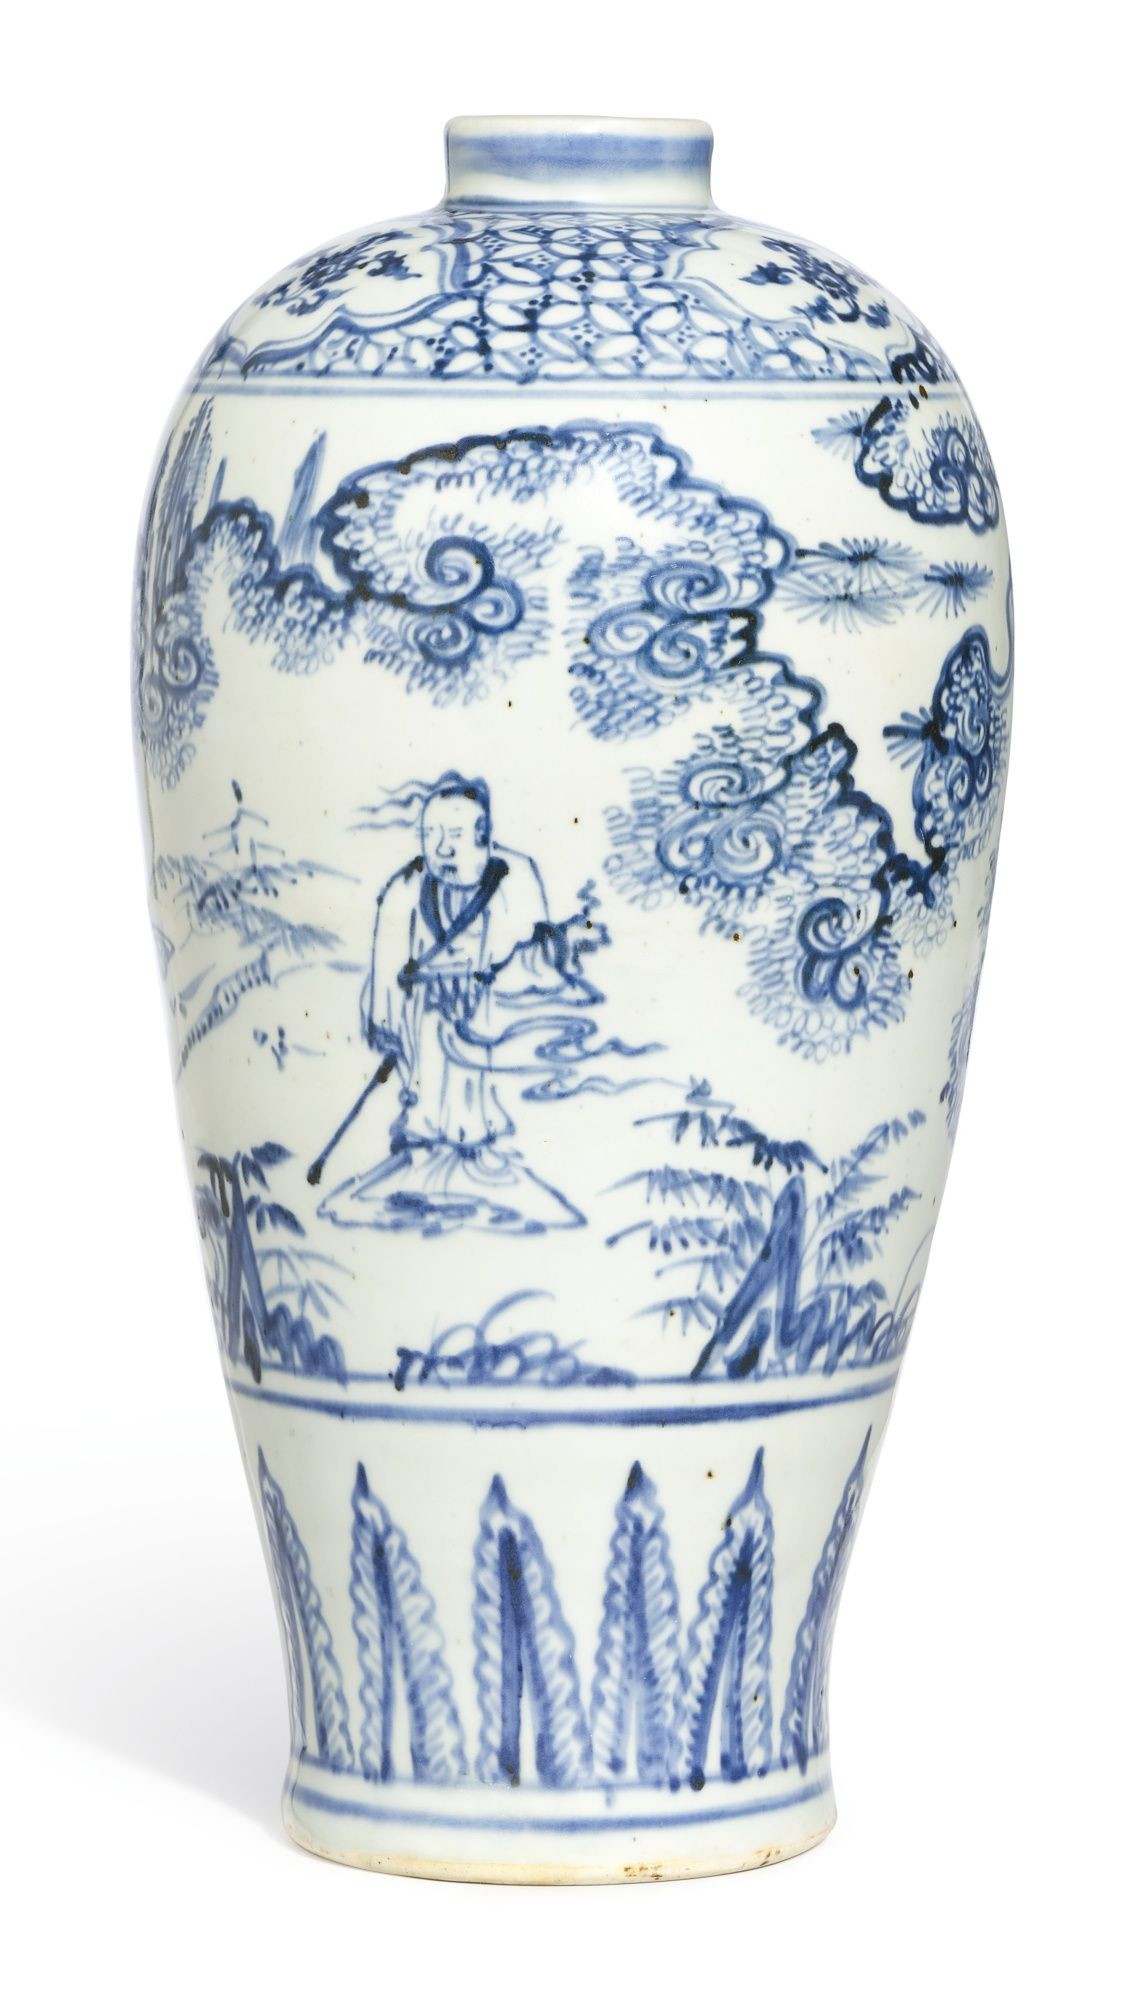 17 Stunning Blue and White Chinese Vases Antique 2024 free download blue and white chinese vases antique of a blue and white figure meipingming dynasty 15th century regarding vase a blue and white